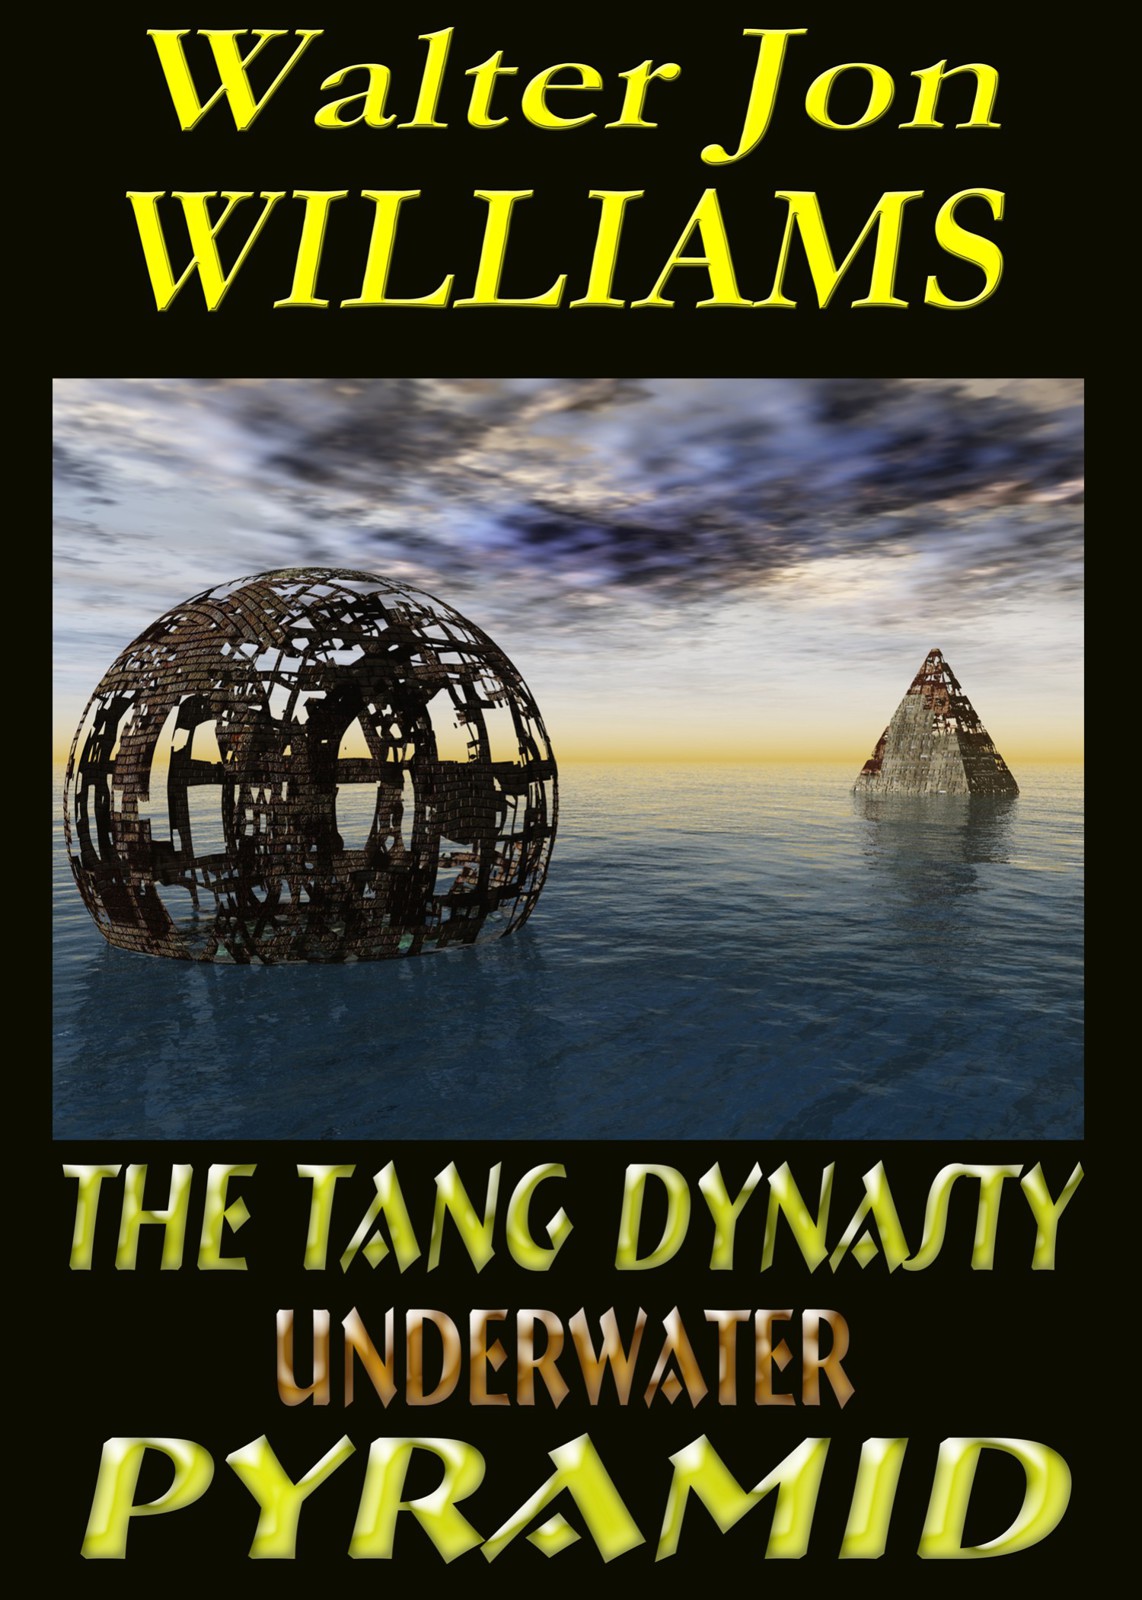 The Tang Dynasty Underwater Pyramid by Walter Jon Williams